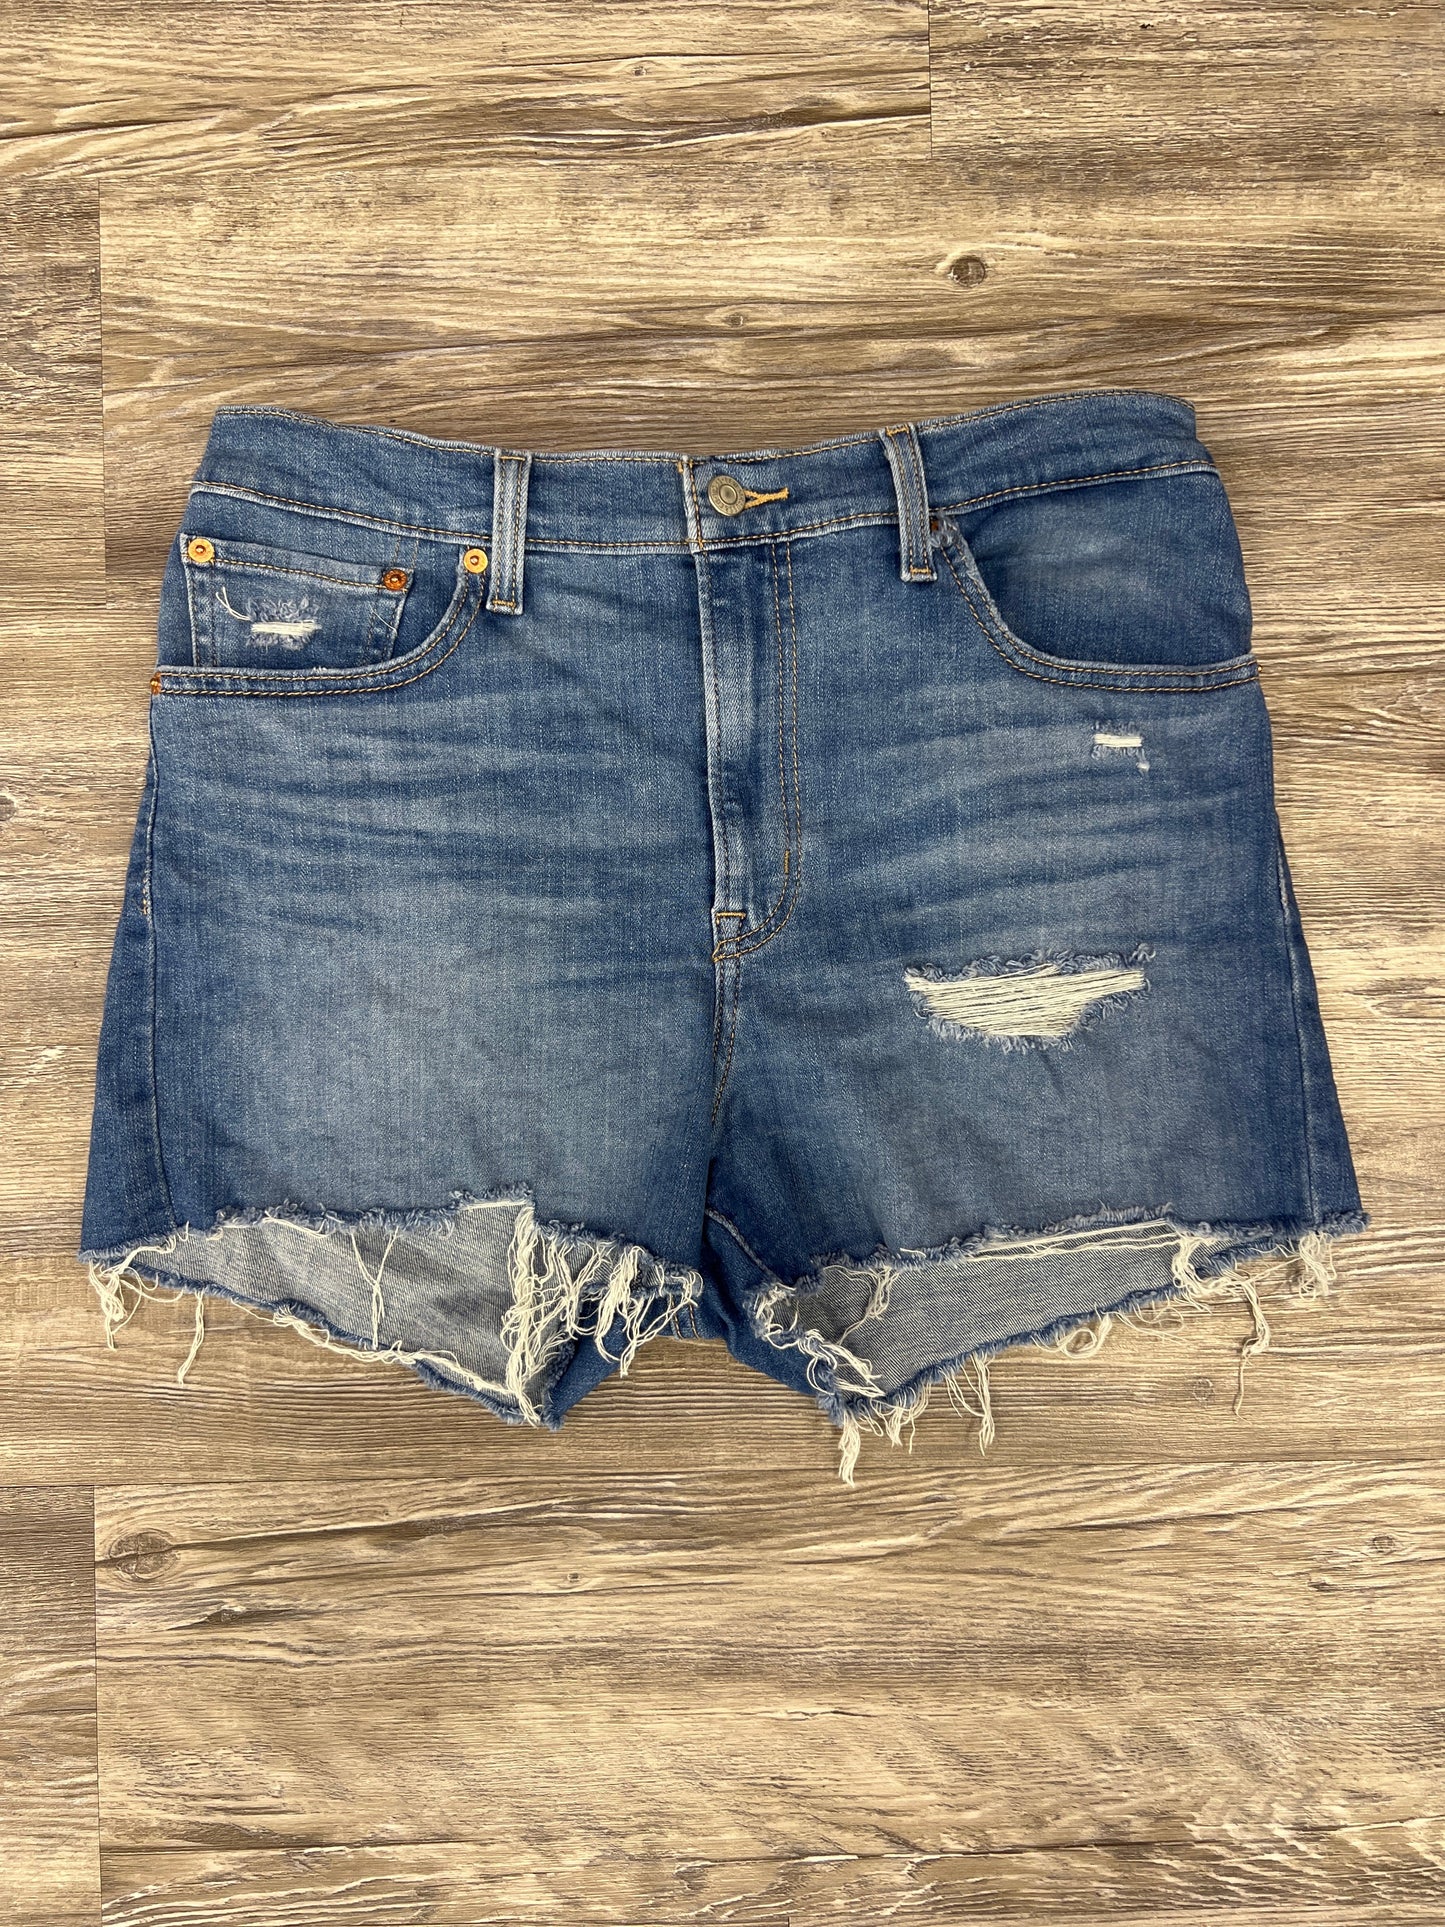 Shorts By Levis Size: 31